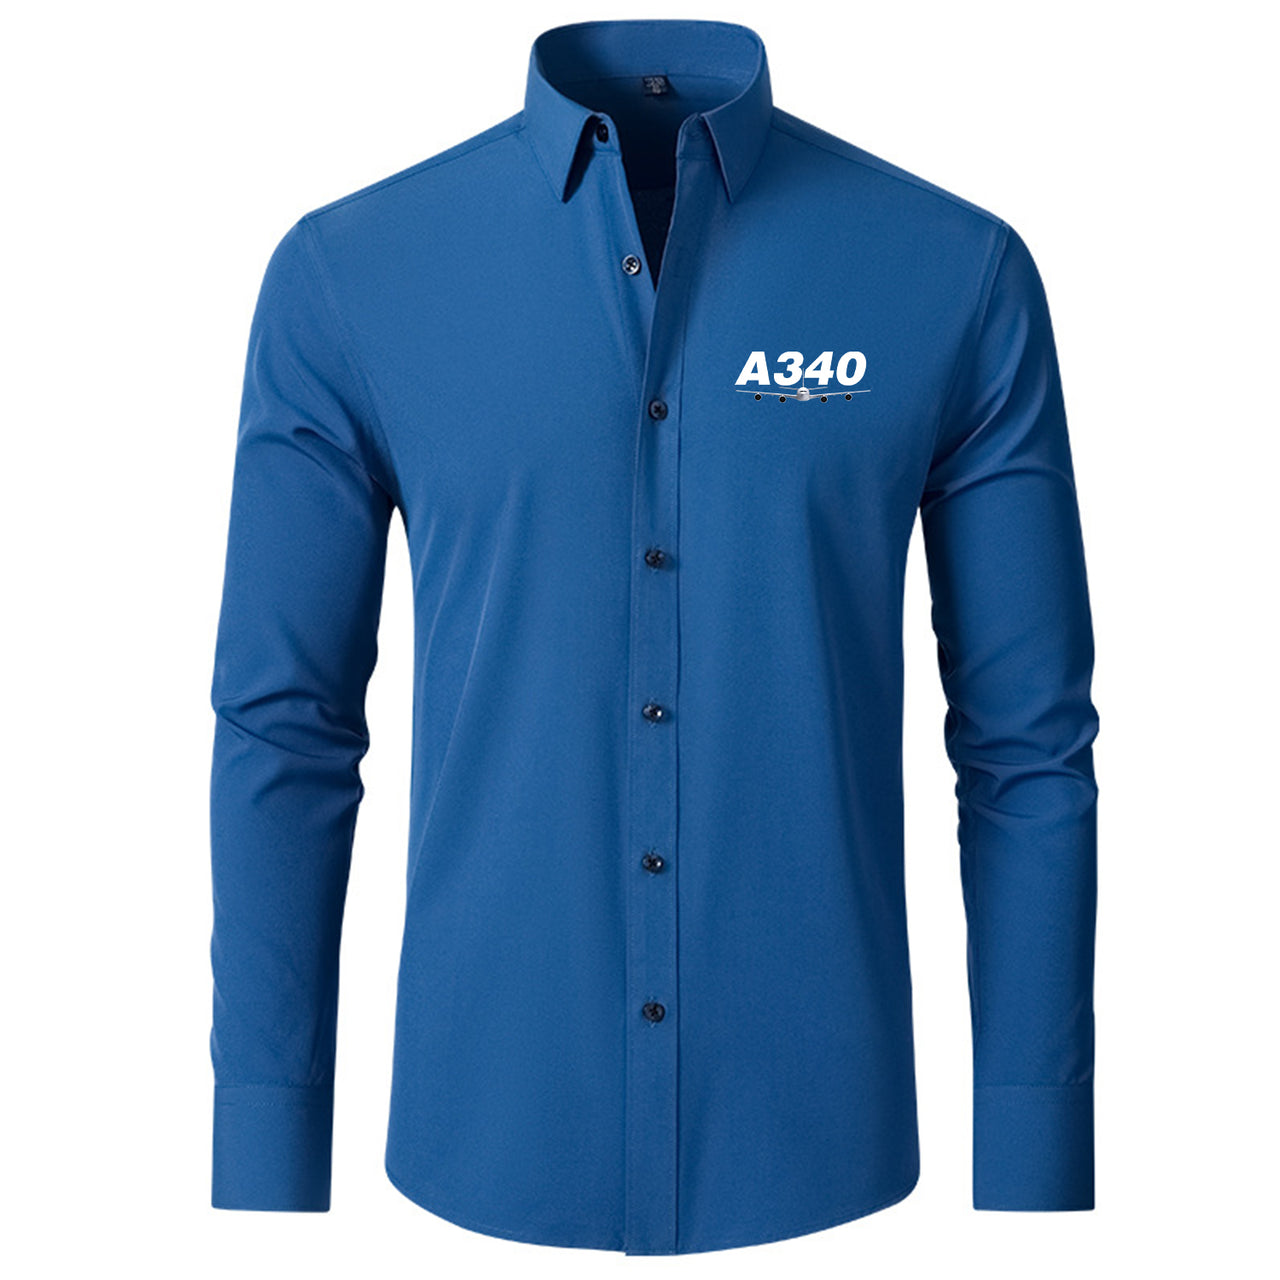 Super Airbus A340 Designed Long Sleeve Shirts